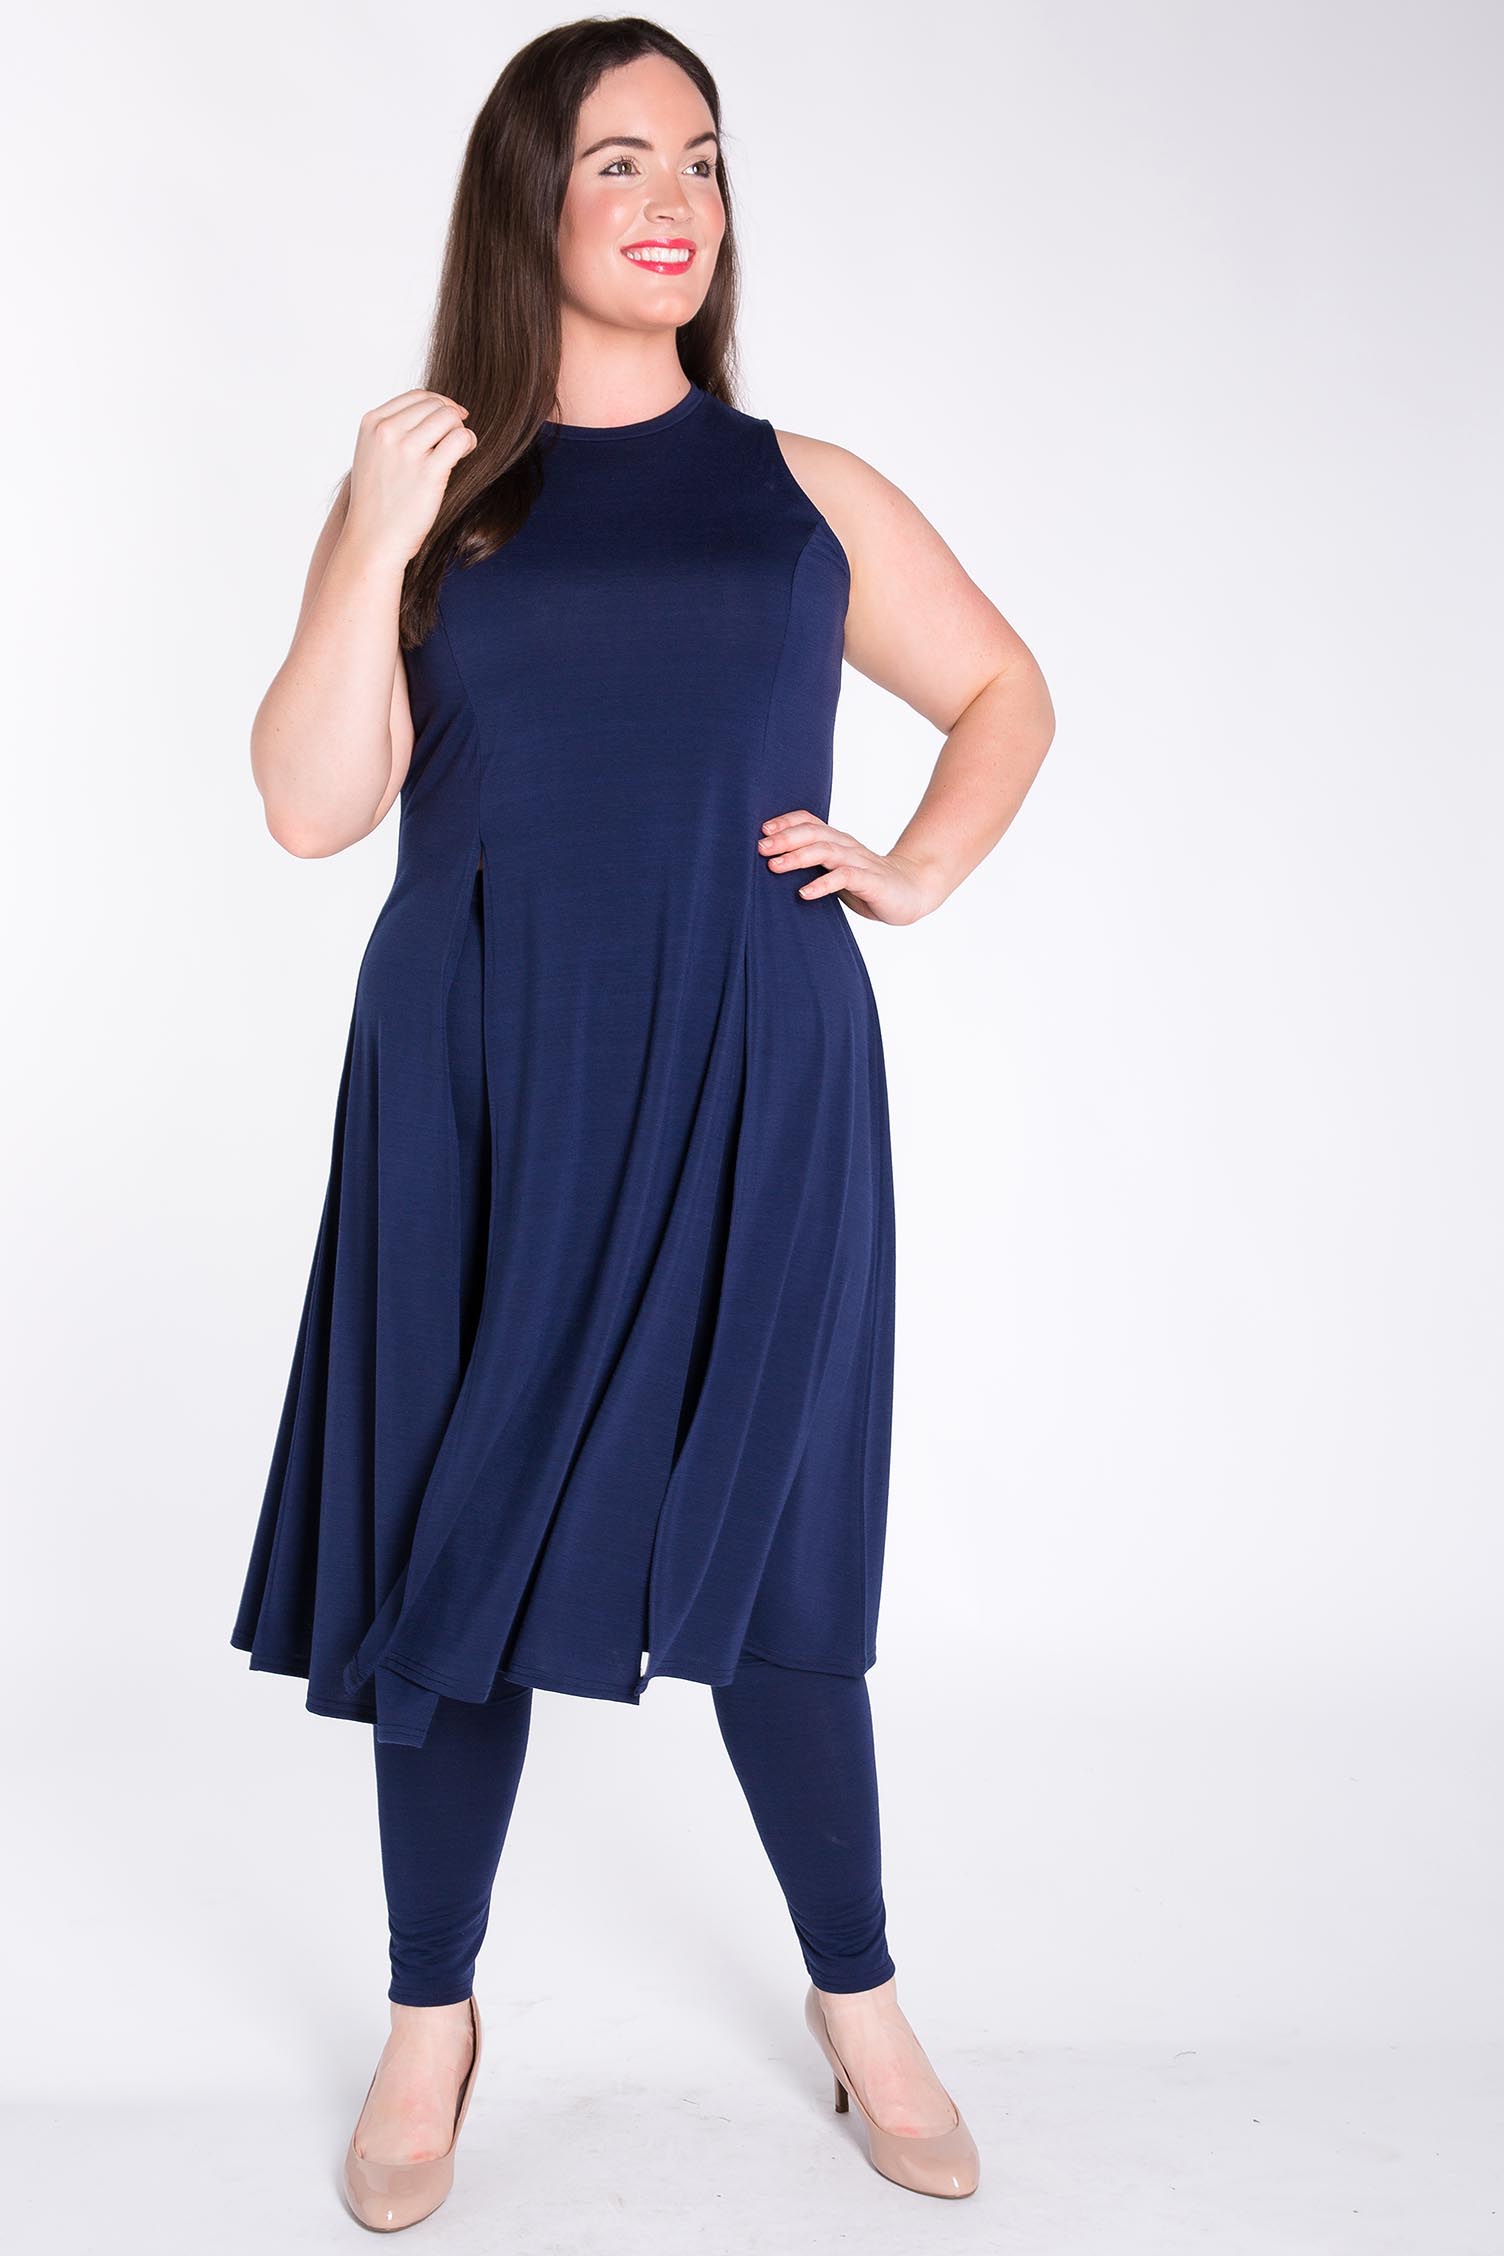 navy tunic tops to wear over leggings